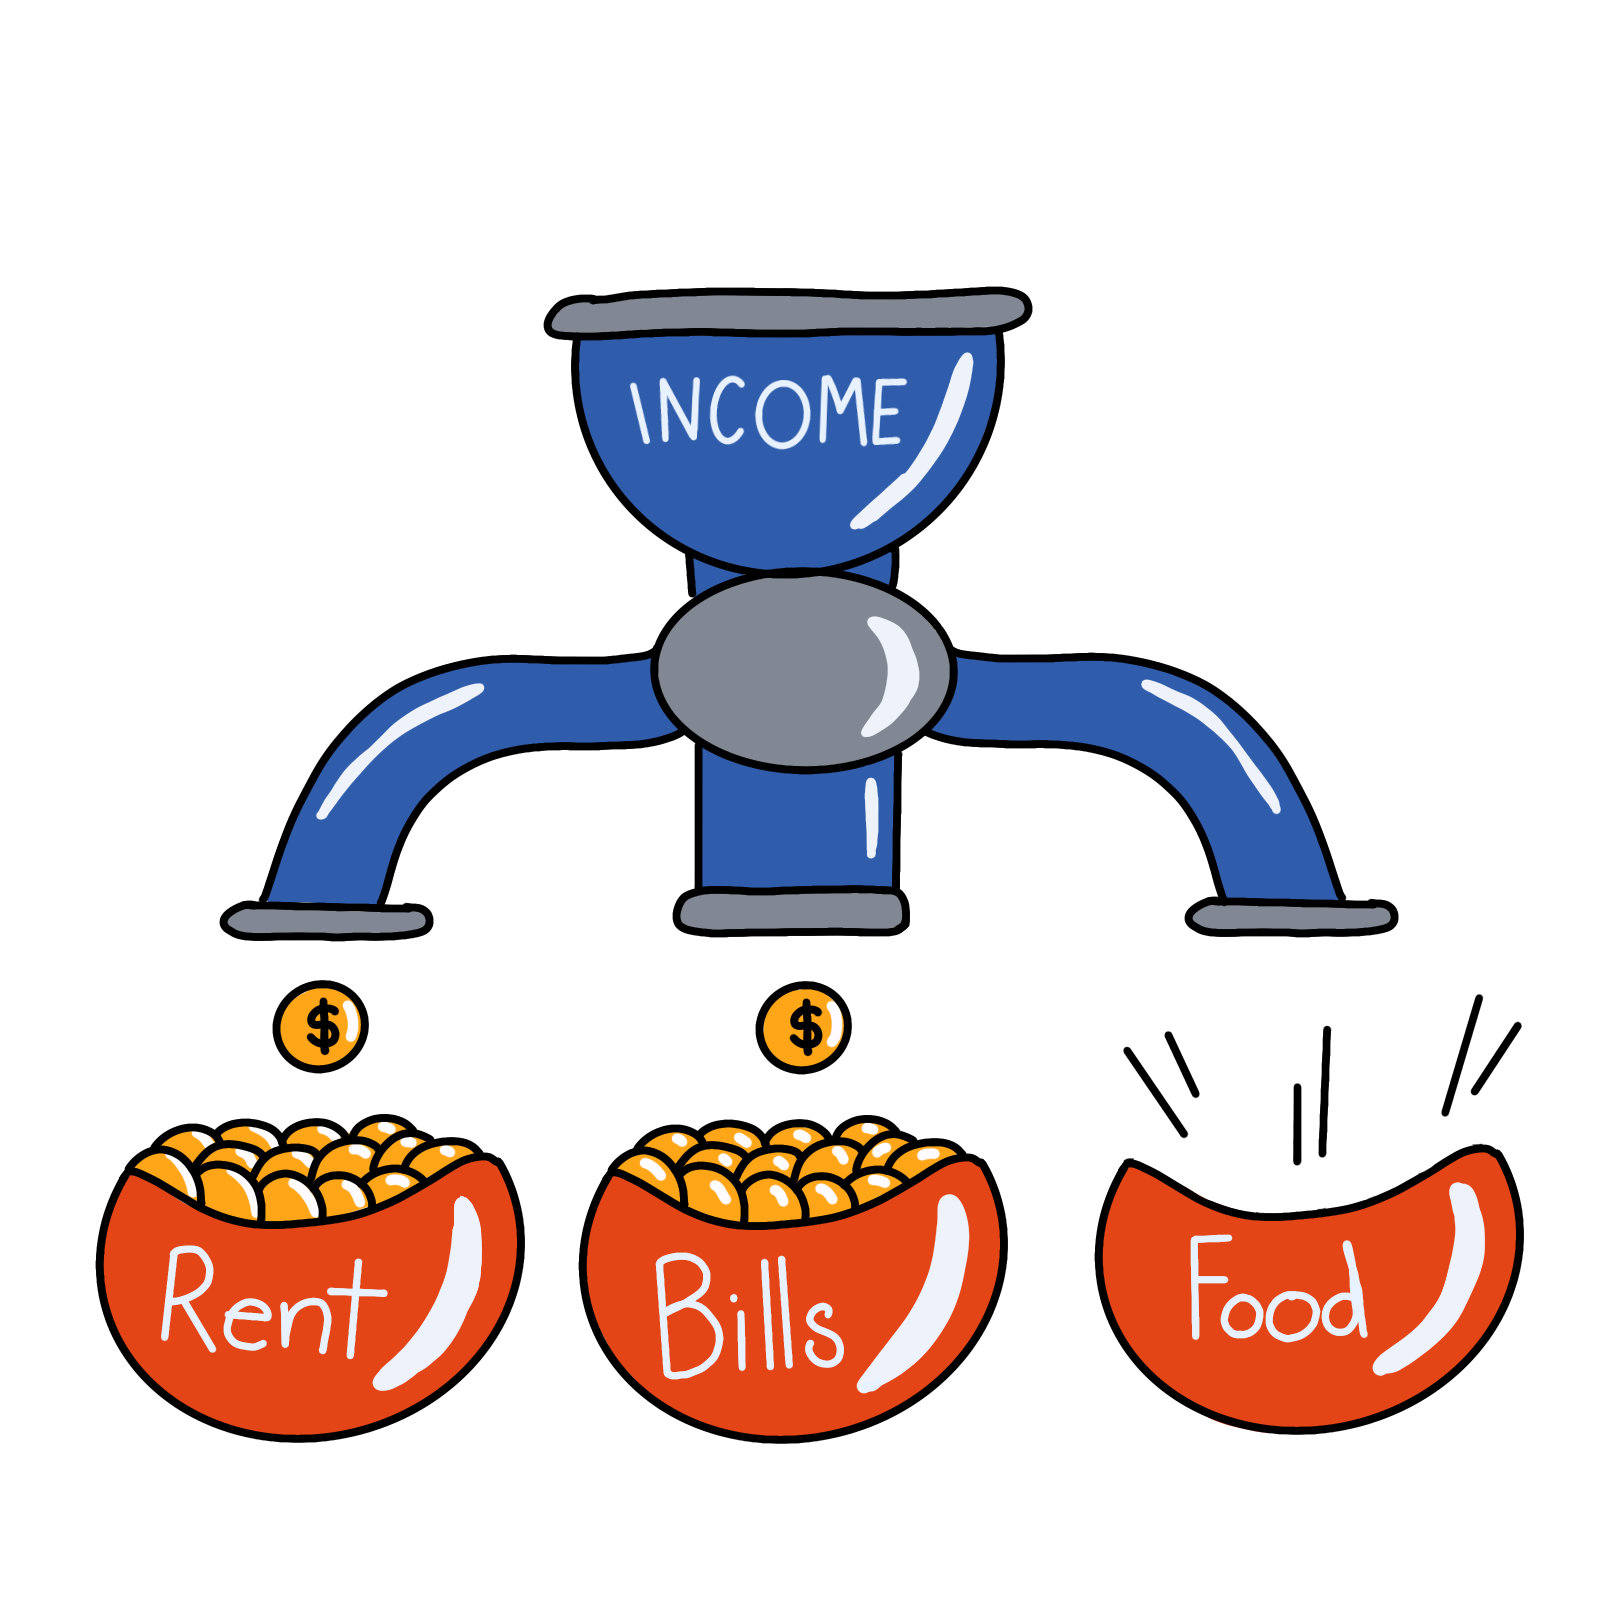 Illustration by Celina Koops of a series of pipes labelled "income" feed money into three bowls. The bowls are labelled "rent," "bills," and "food." While "rent" and "bills" are full of coins, there is no money left to fill the "food" bowl.